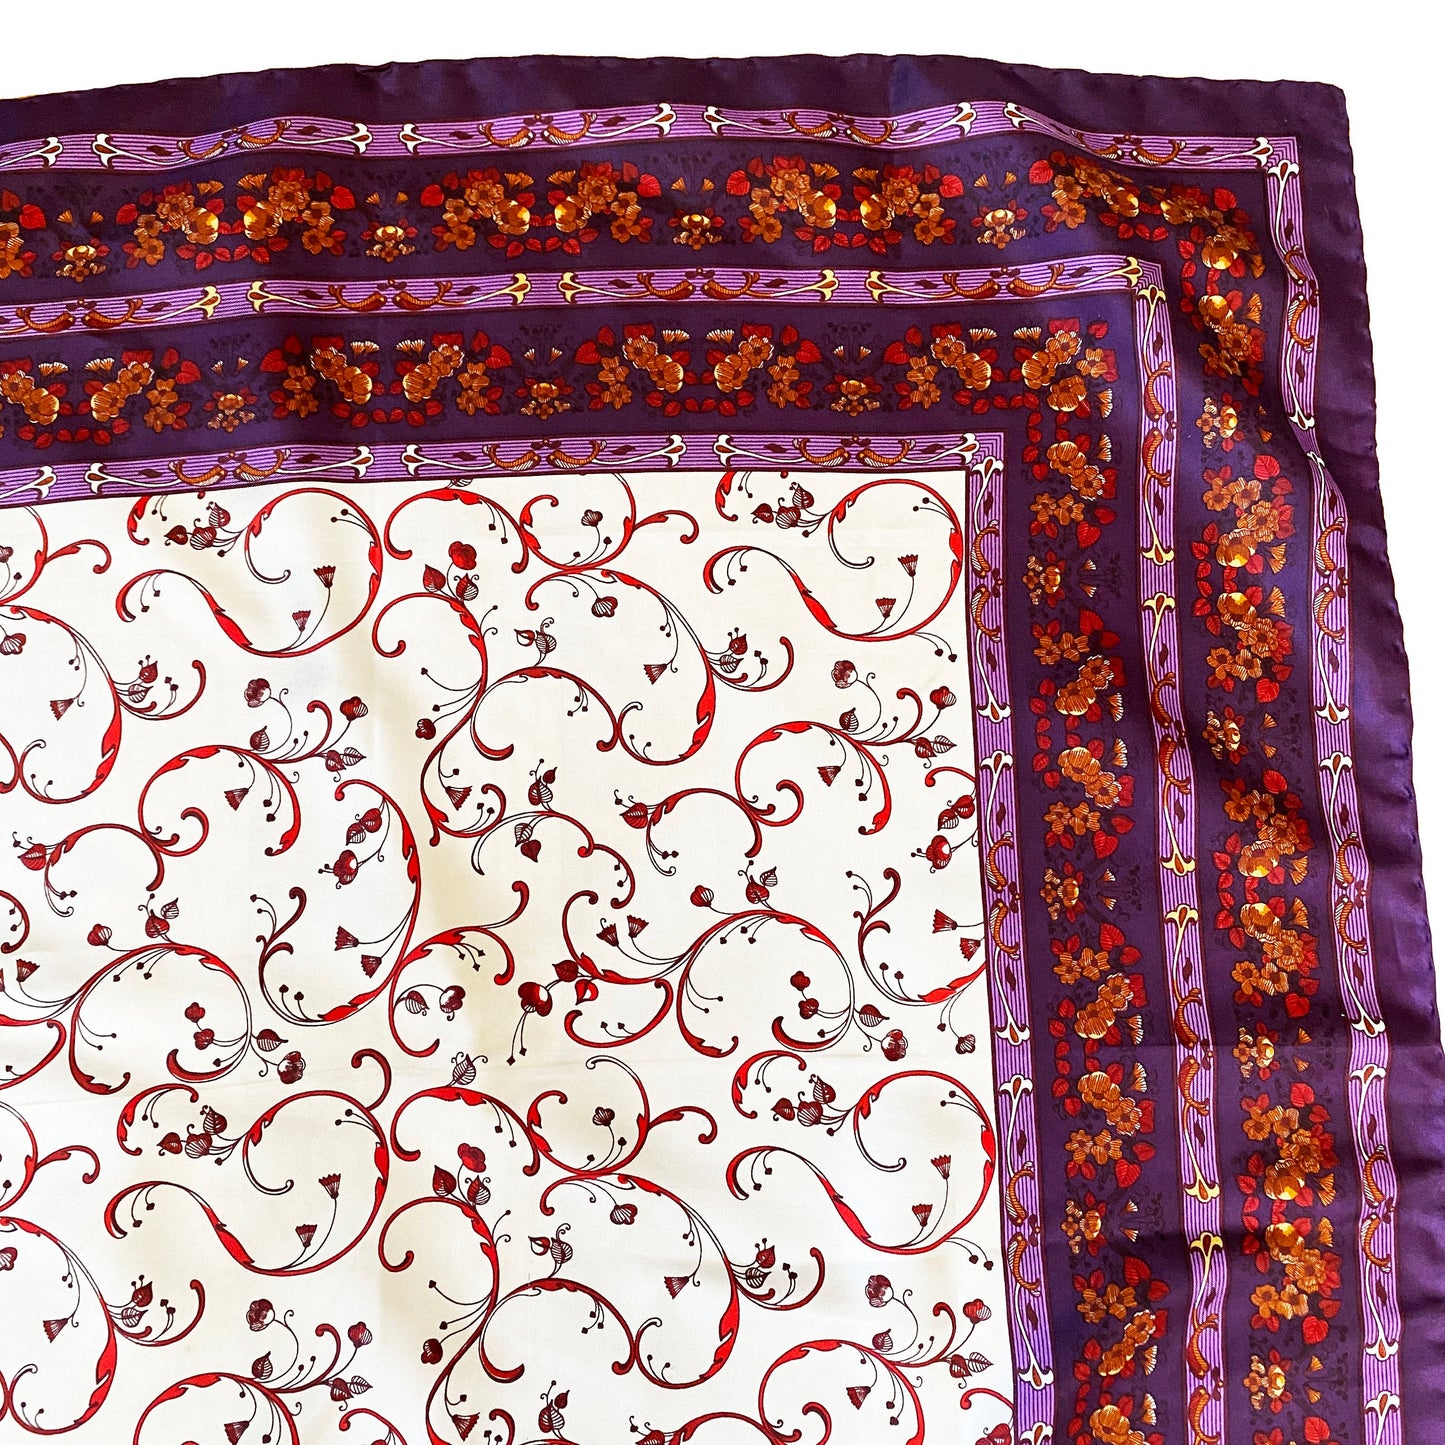 1970-1980s Pierre Balmain Silk Twill Purple White Gold Paisley Floral Large Square Scarf Made in France Head Scarf Designer Scarf Top